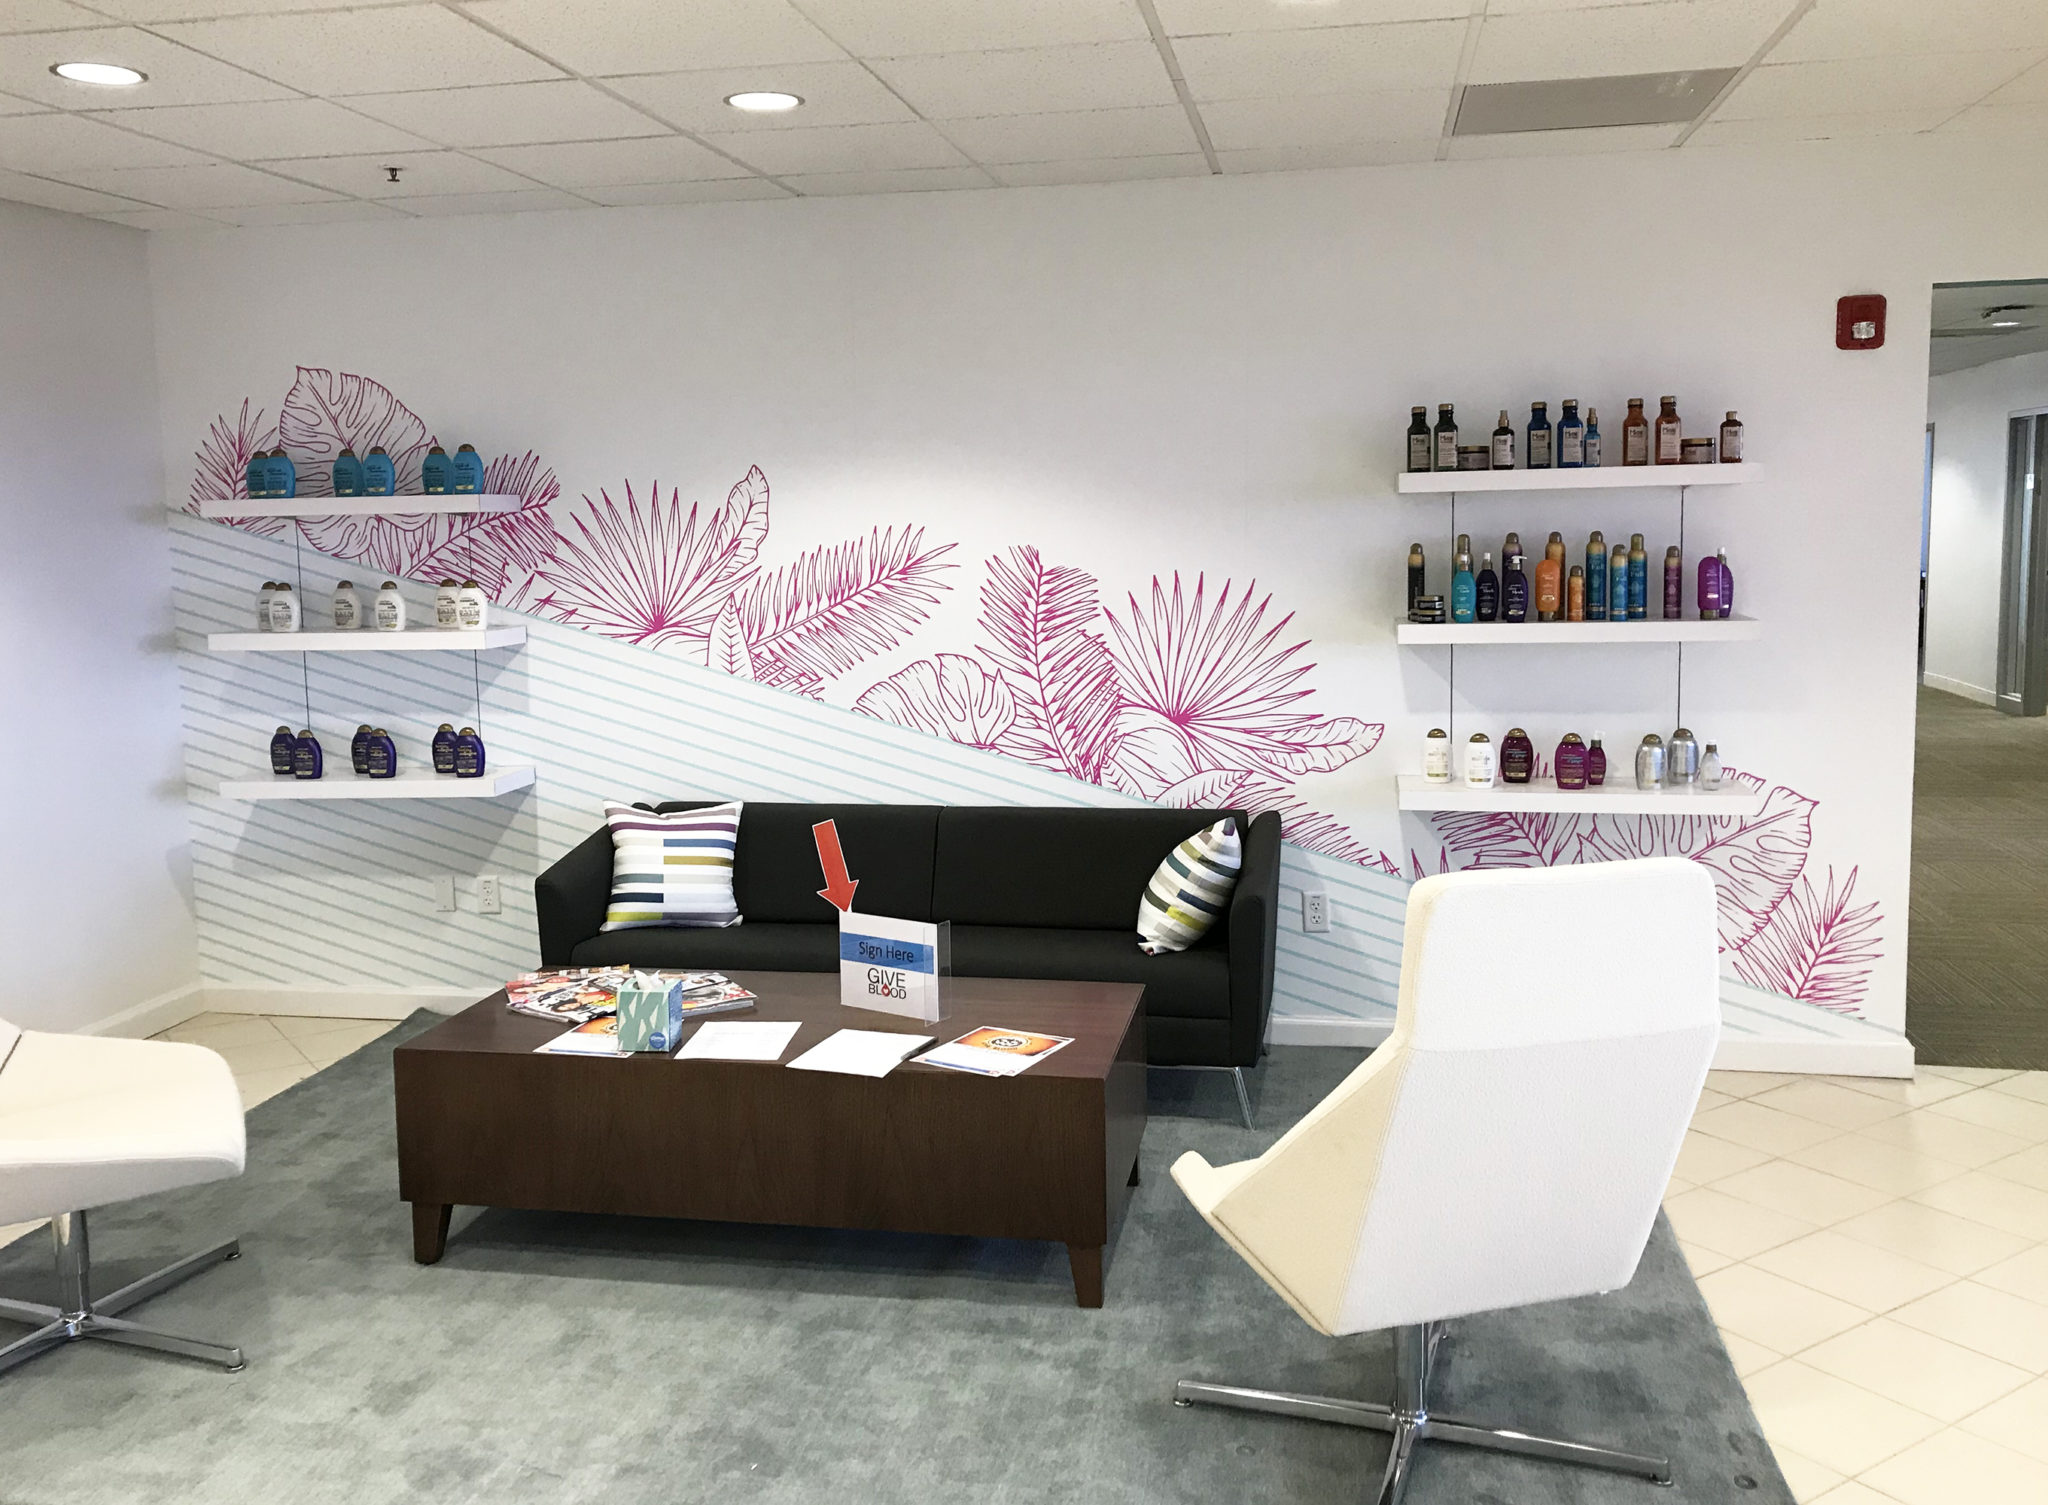 White seating area with white chairs, gray couch, slate gray rug, white shelves with colorful bottles of hair products on them on an accent wall with a decorative pattern of aqua-colored stripes and pink leaves and palm fronds Vogue International offices